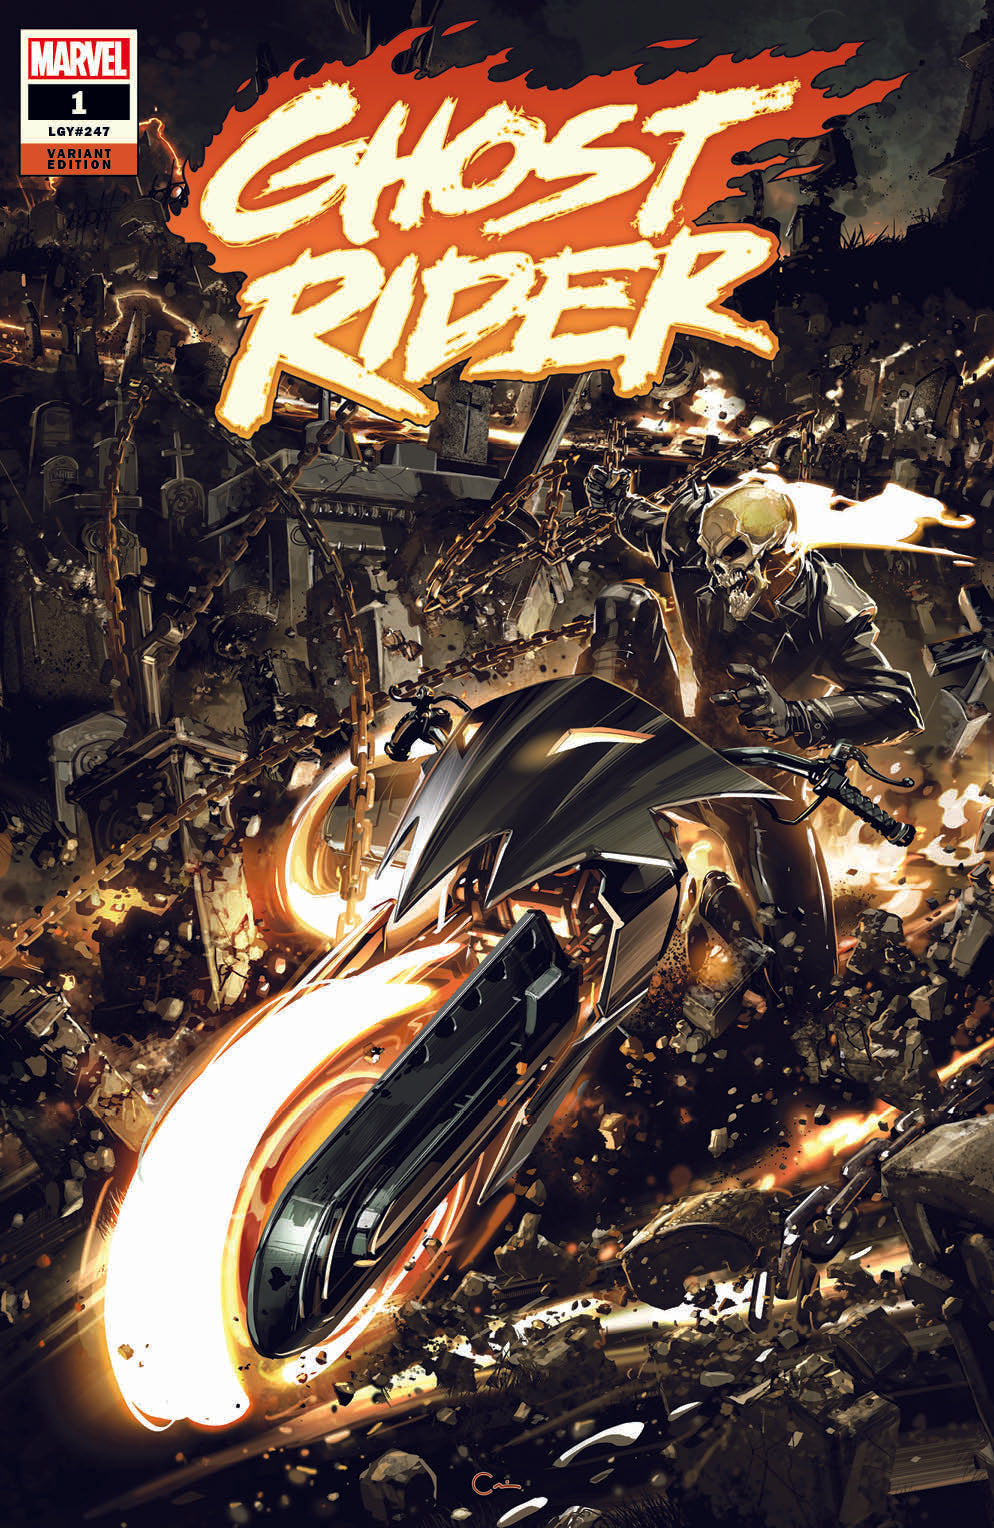 GHOST RIDER #1 CLAYTON CRAIN EXCLUSIVE OPTIONS